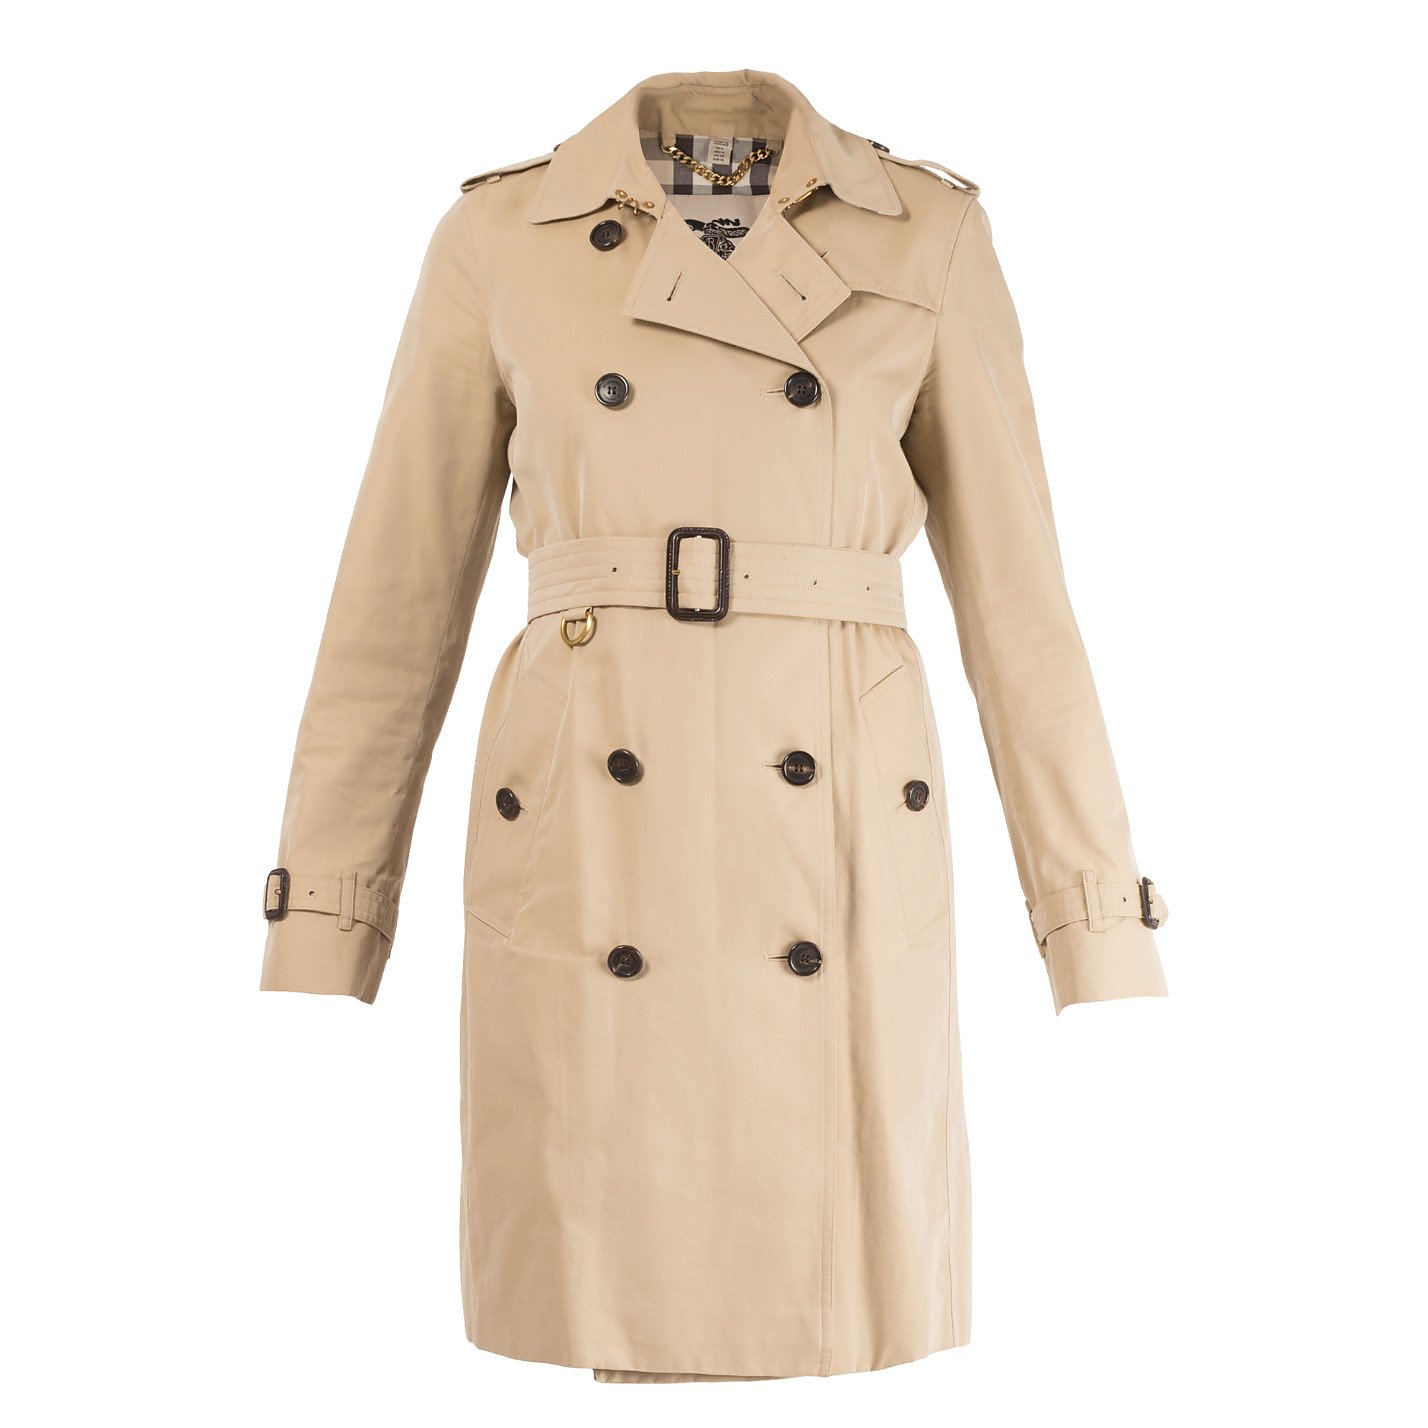 Rent or Buy Burberry Belted Trench Coat from MyWardrobeHQ.com